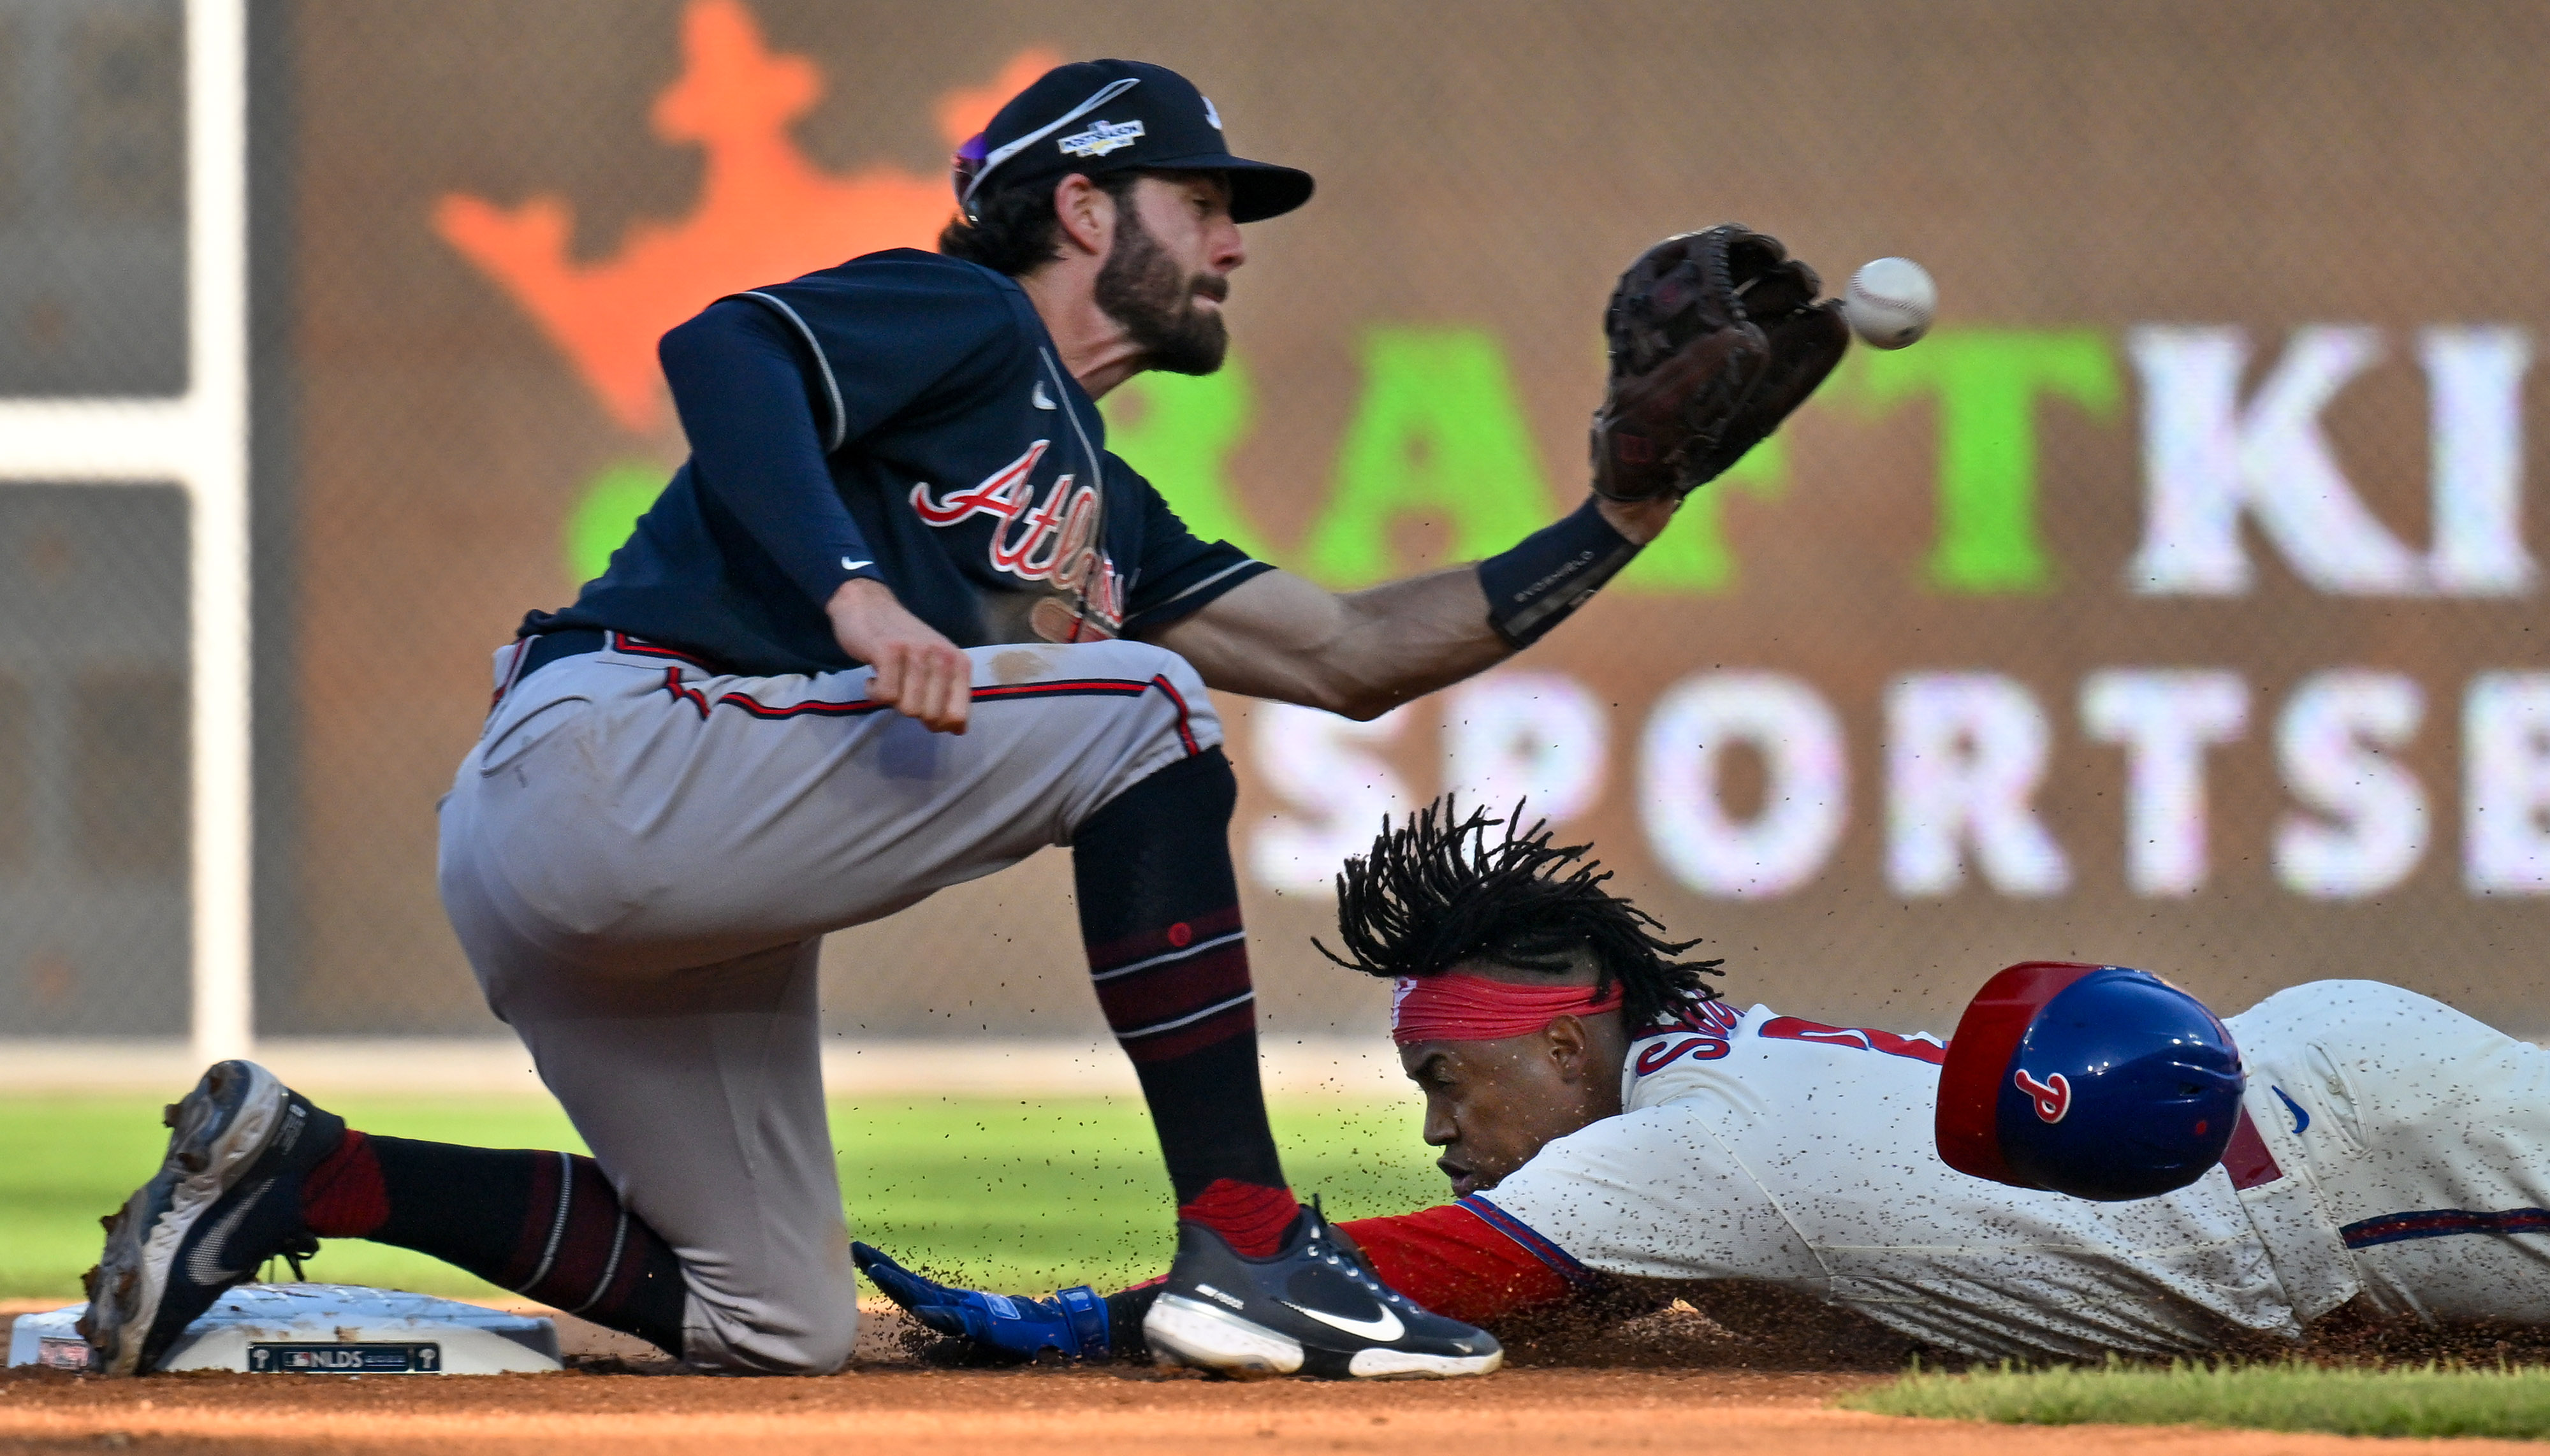 Atlanta Braves News: Dansby Swanson's hair needs your help in MLB poll